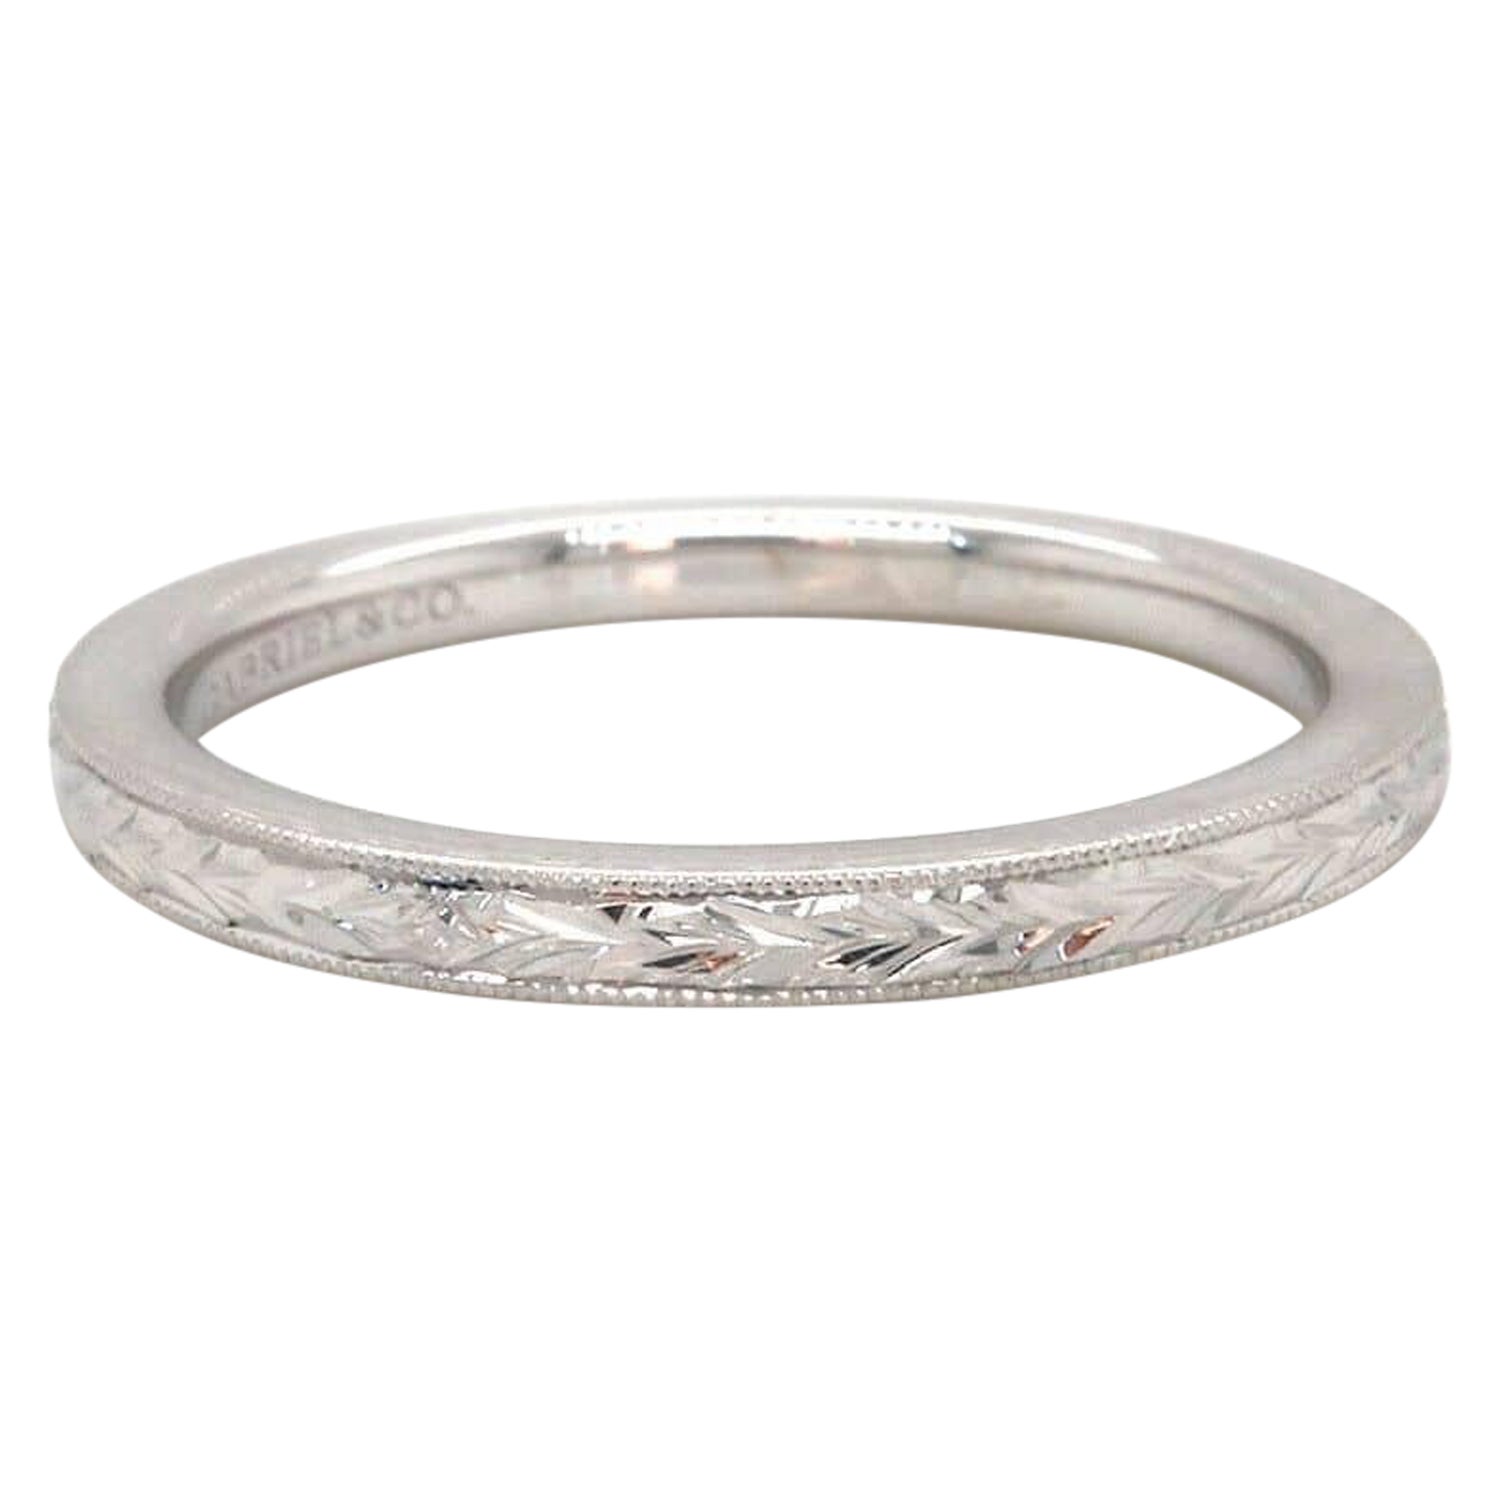 New Gabriel & Co. Filigree Engraved Band Ring in 14K White Gold For Sale